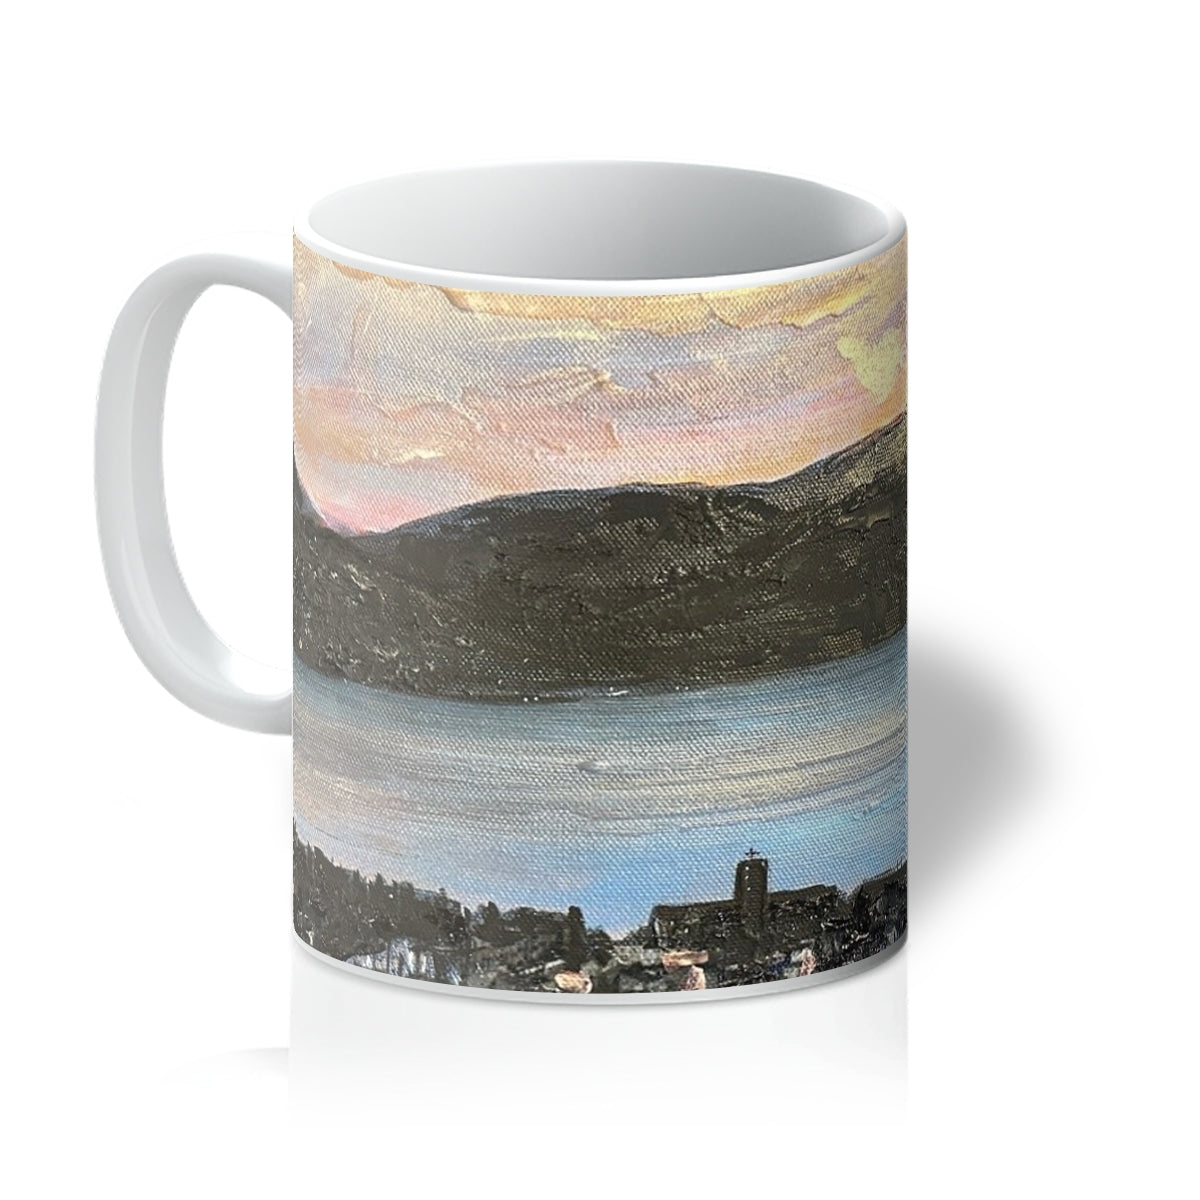 From Lyle Hill Art Gifts Mug-Homeware-River Clyde Art Gallery-11oz-White-Paintings, Prints, Homeware, Art Gifts From Scotland By Scottish Artist Kevin Hunter